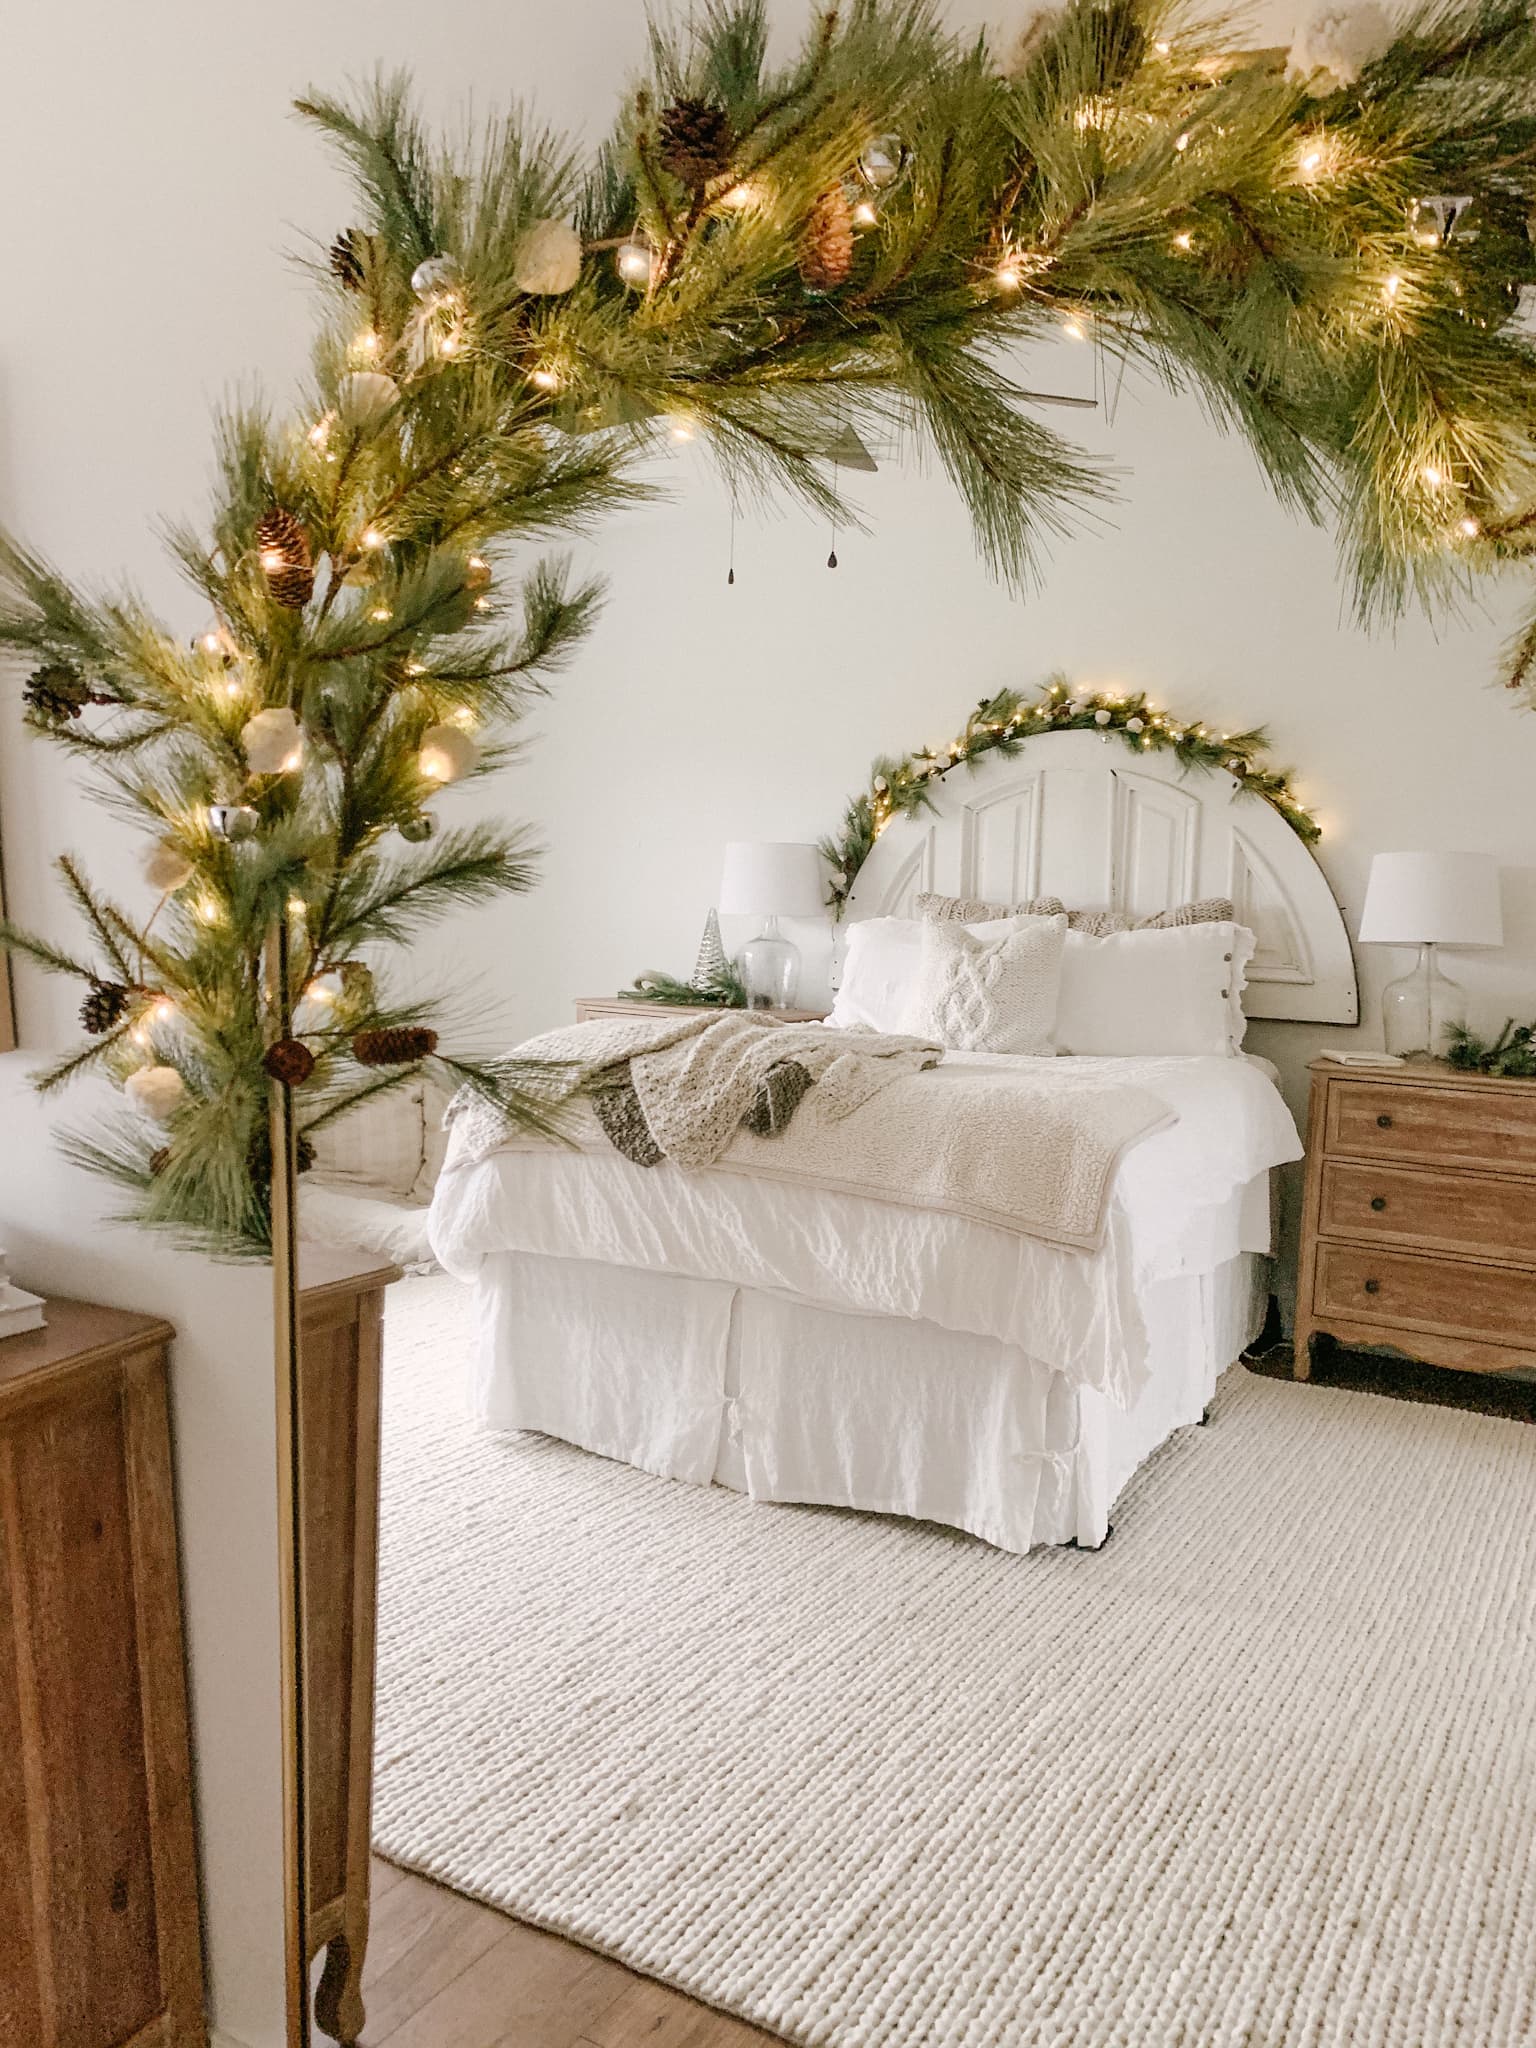 Decorate Your Bedroom for Christmas in Five Simple Steps